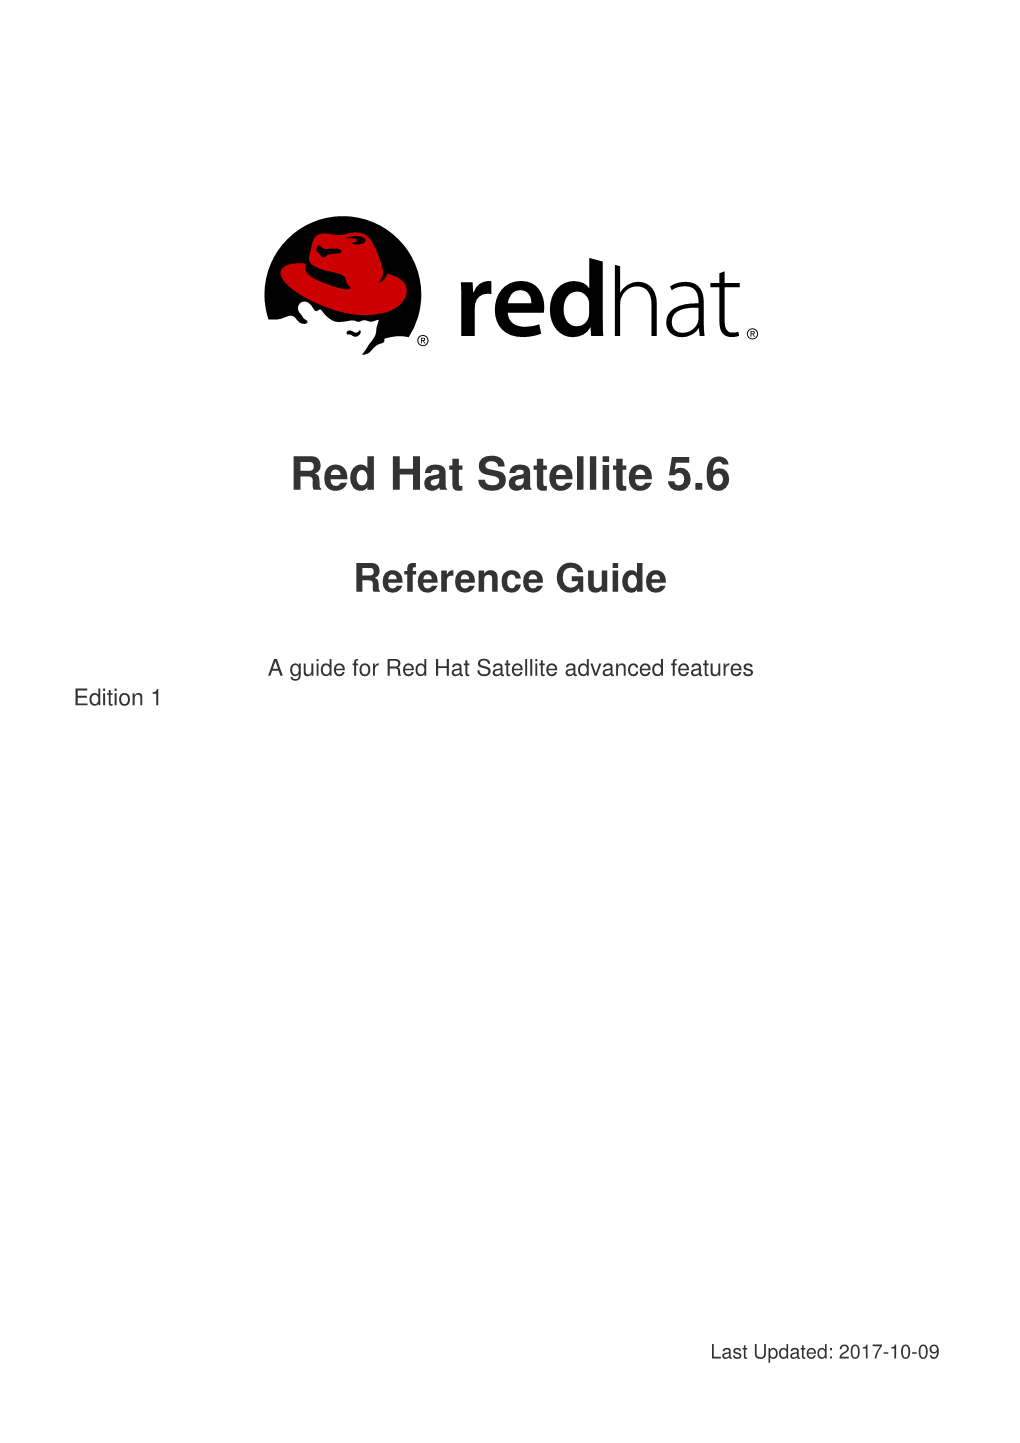 Red Hat Satellite 5.6 Reference Guide